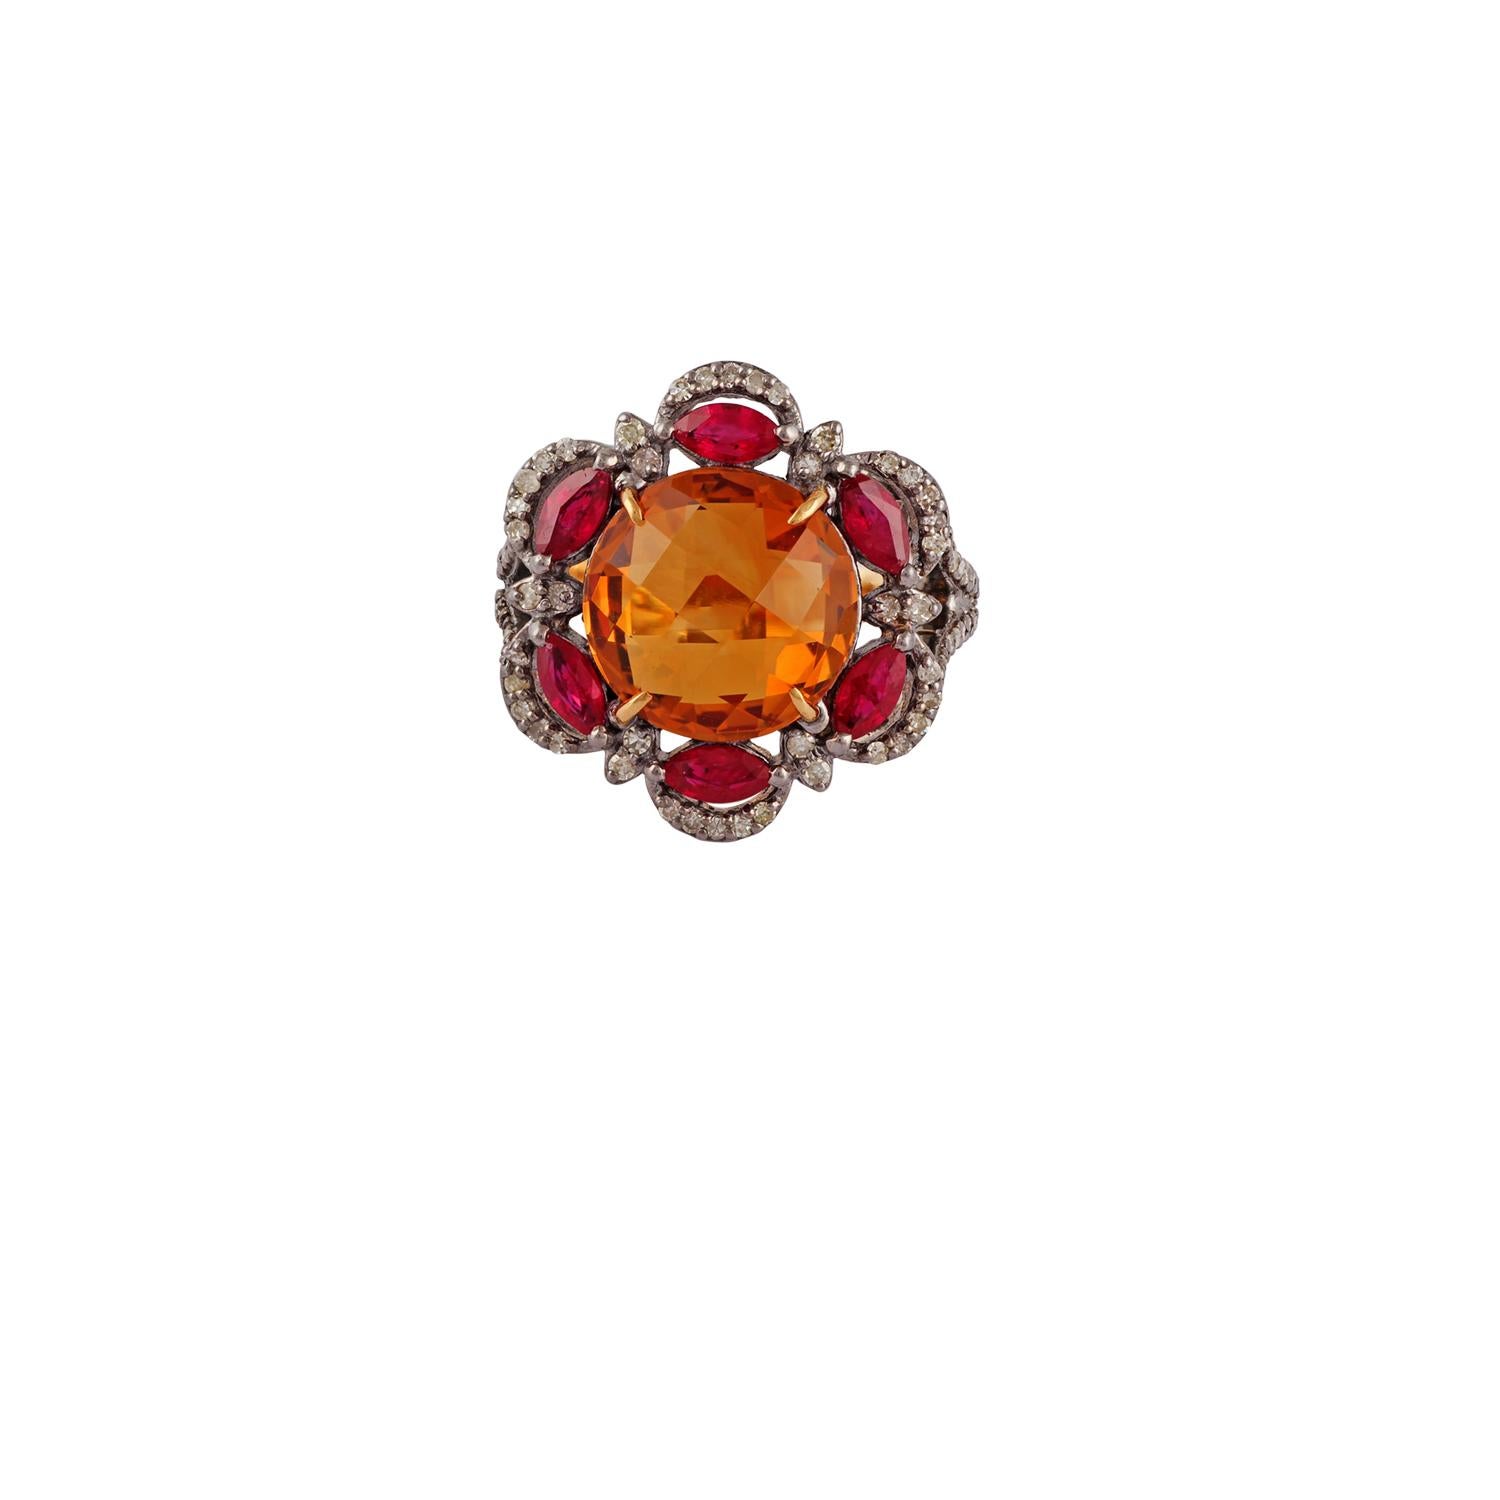 Beautiful Antique Victorian 14K Yellow Gold & silver Citrine, Ruby &  Diamond Cocktail Ring. This incredible cocktail ring is crafted in 14k yellow gold & silver . The center holds a natural vibrant Citrine with an incredible play of color pattern.